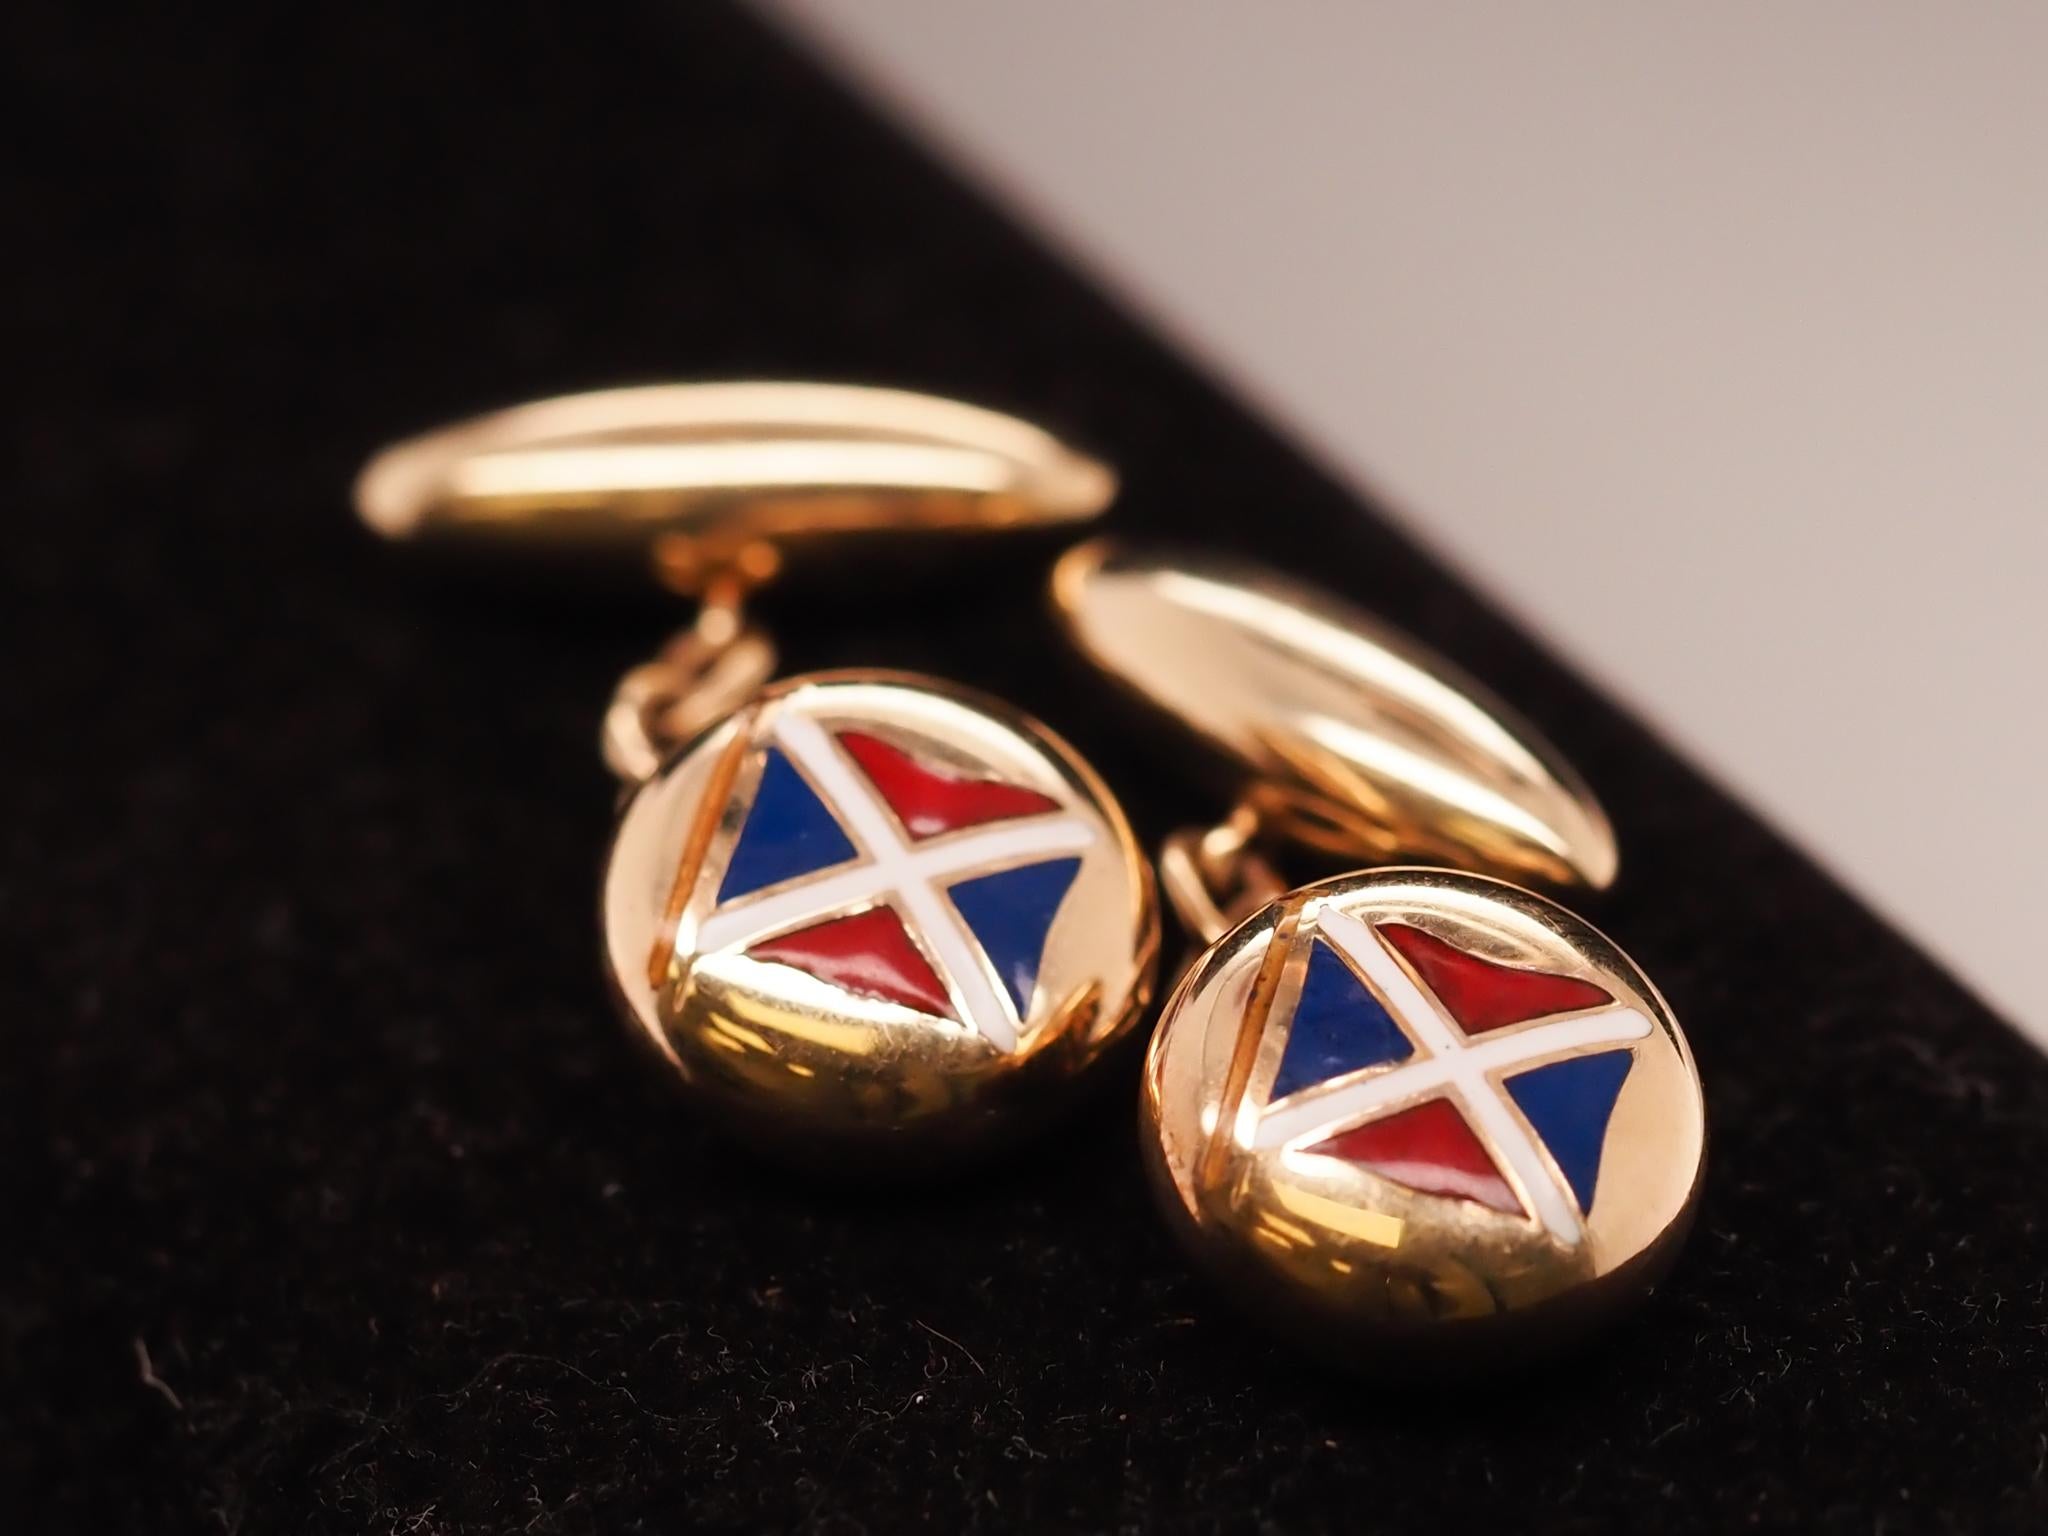 1940s Tiffany & Co 14K Yellow Gold Cufflinks with Enamel Flag For Sale 2